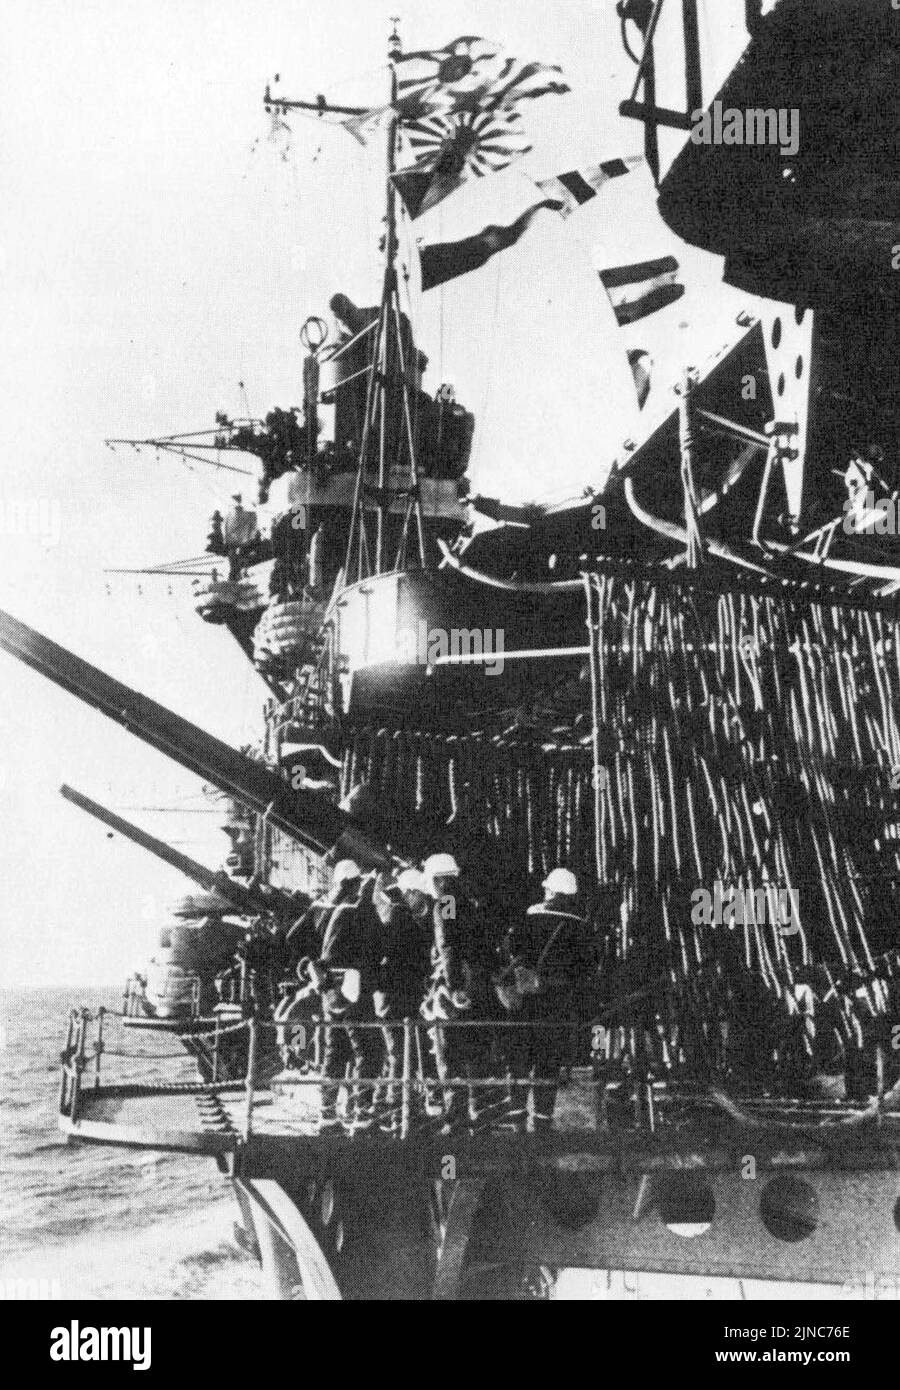 Port-side anti-aircraft gun sponsons in Akagi, showing their low-mounted position on the hull, which greatly restricted their arc of fire. Stock Photo